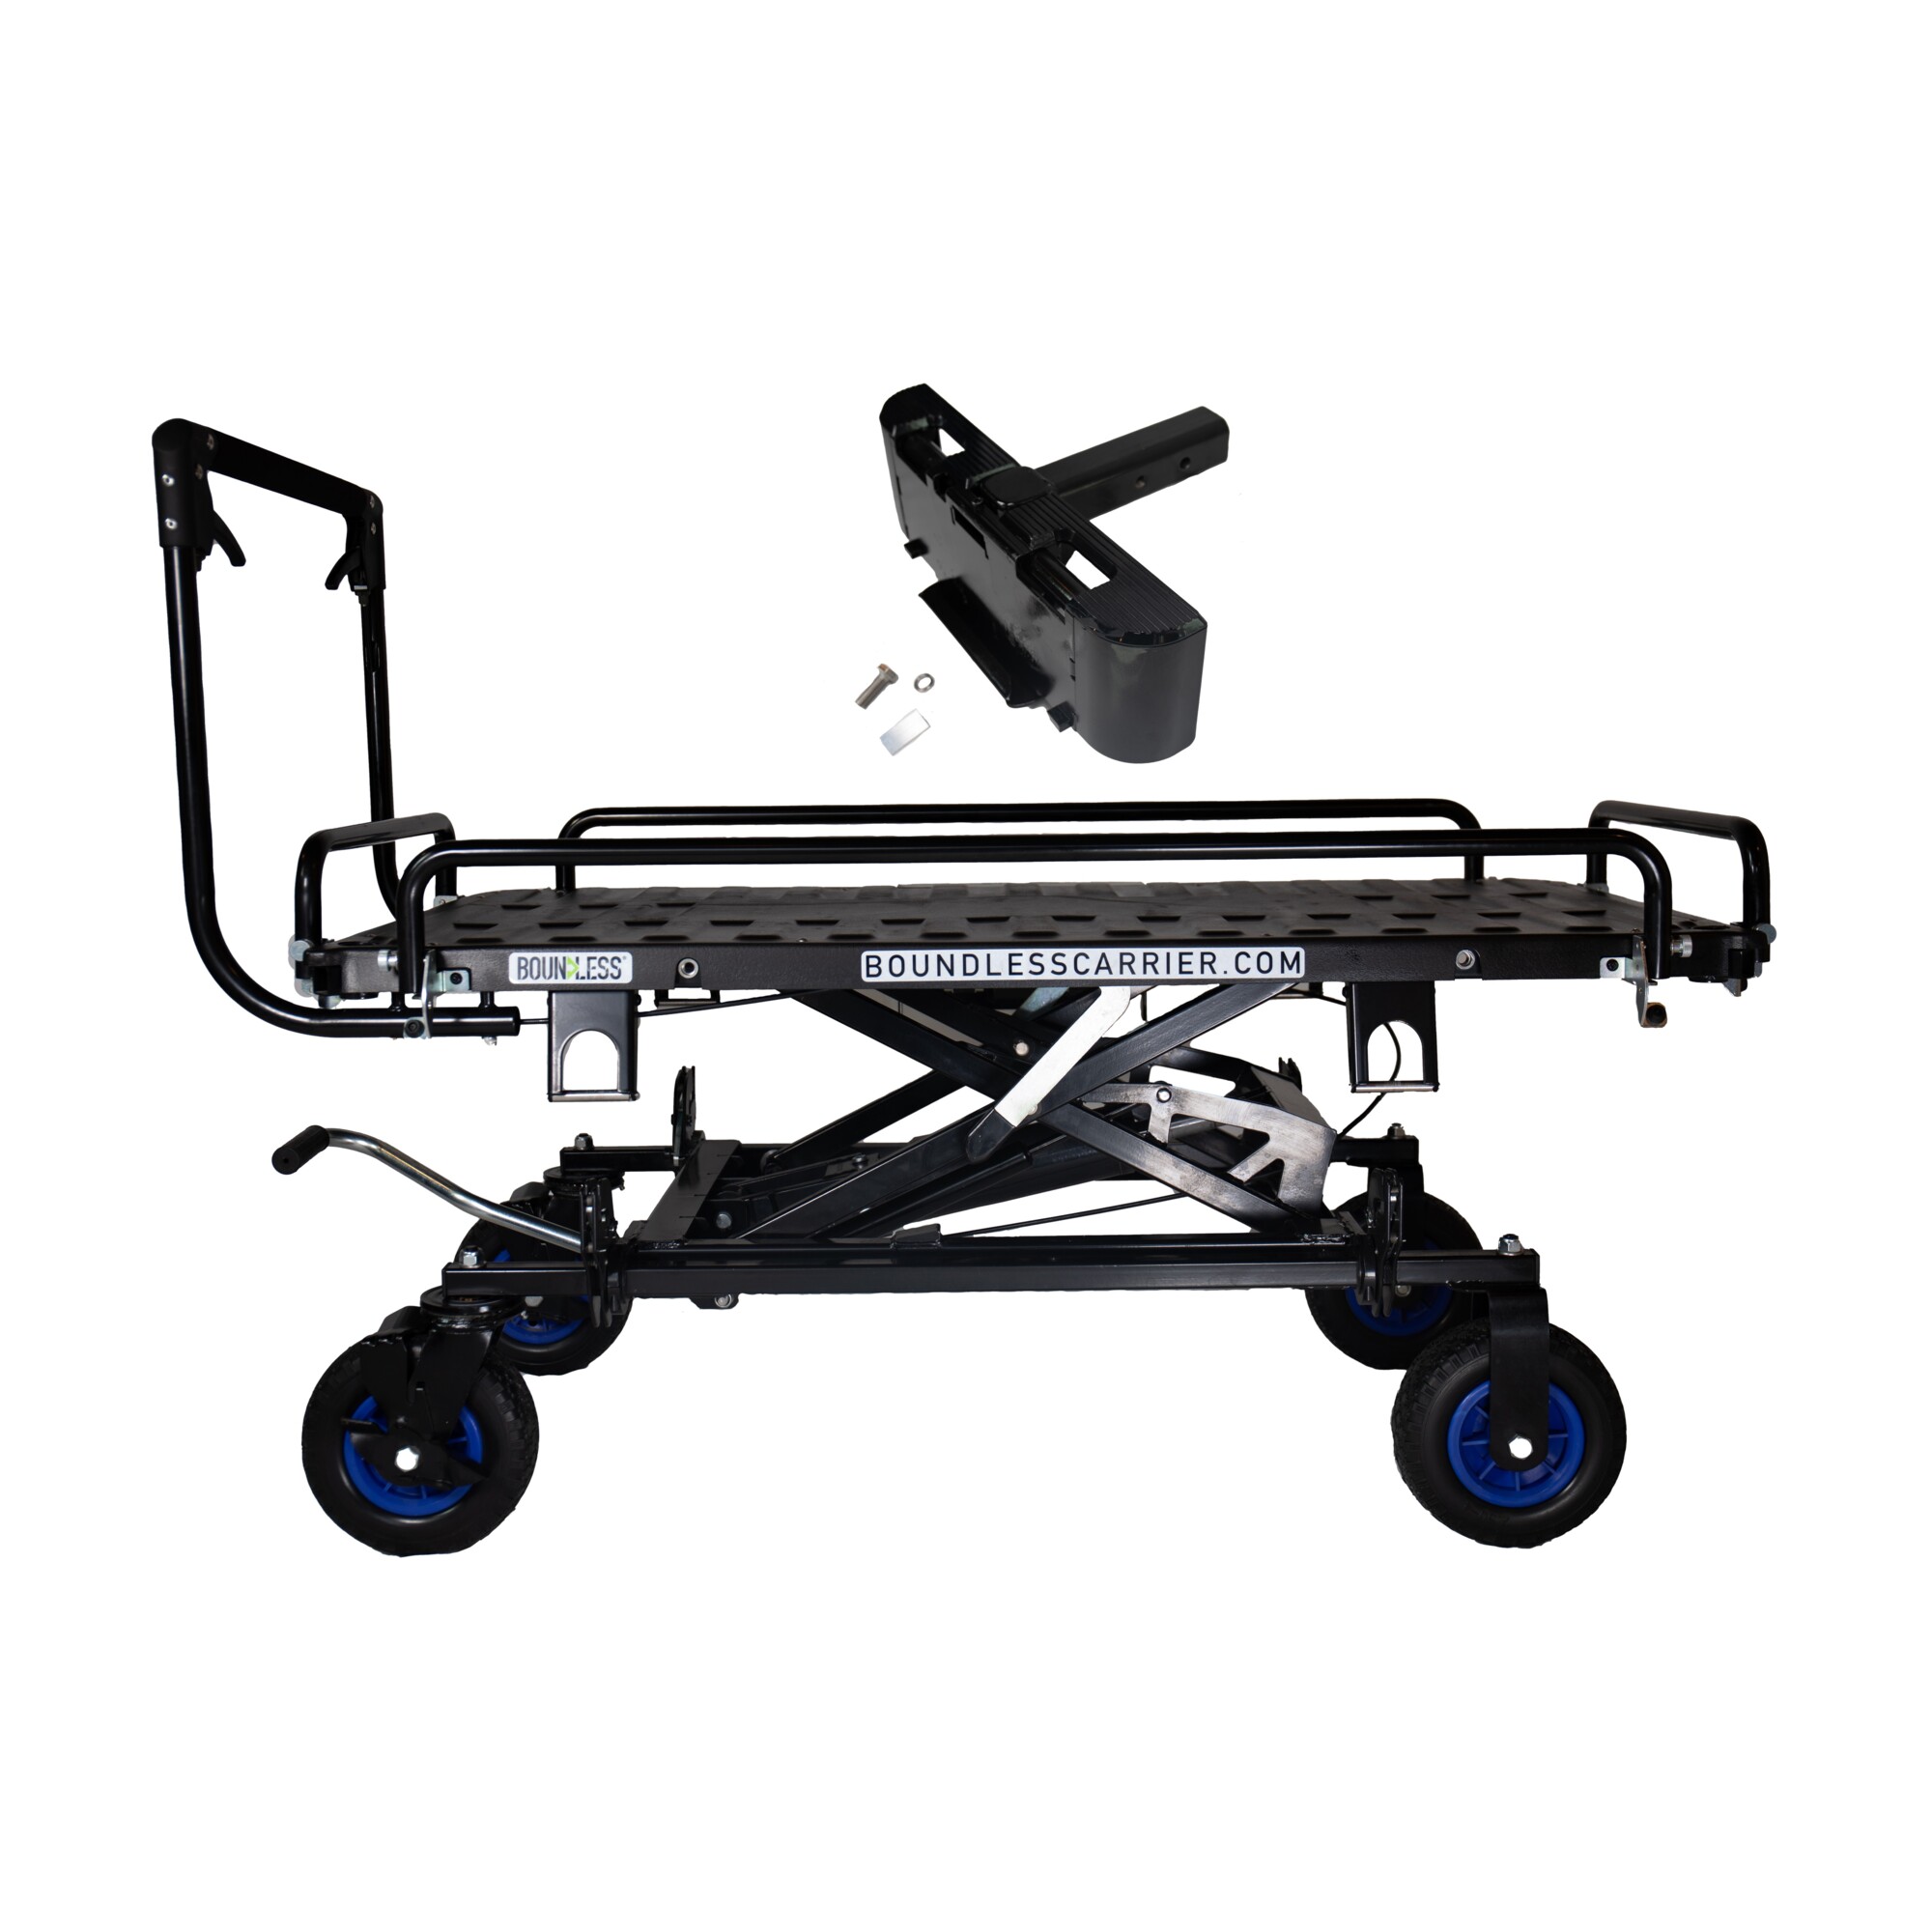 BOUNDLESS, Hitch attachable, carrier, cart, and lift table, Capacity 300 lb, Receiver Size 2 in, Material Carbon Steel, Model BNDL-CC